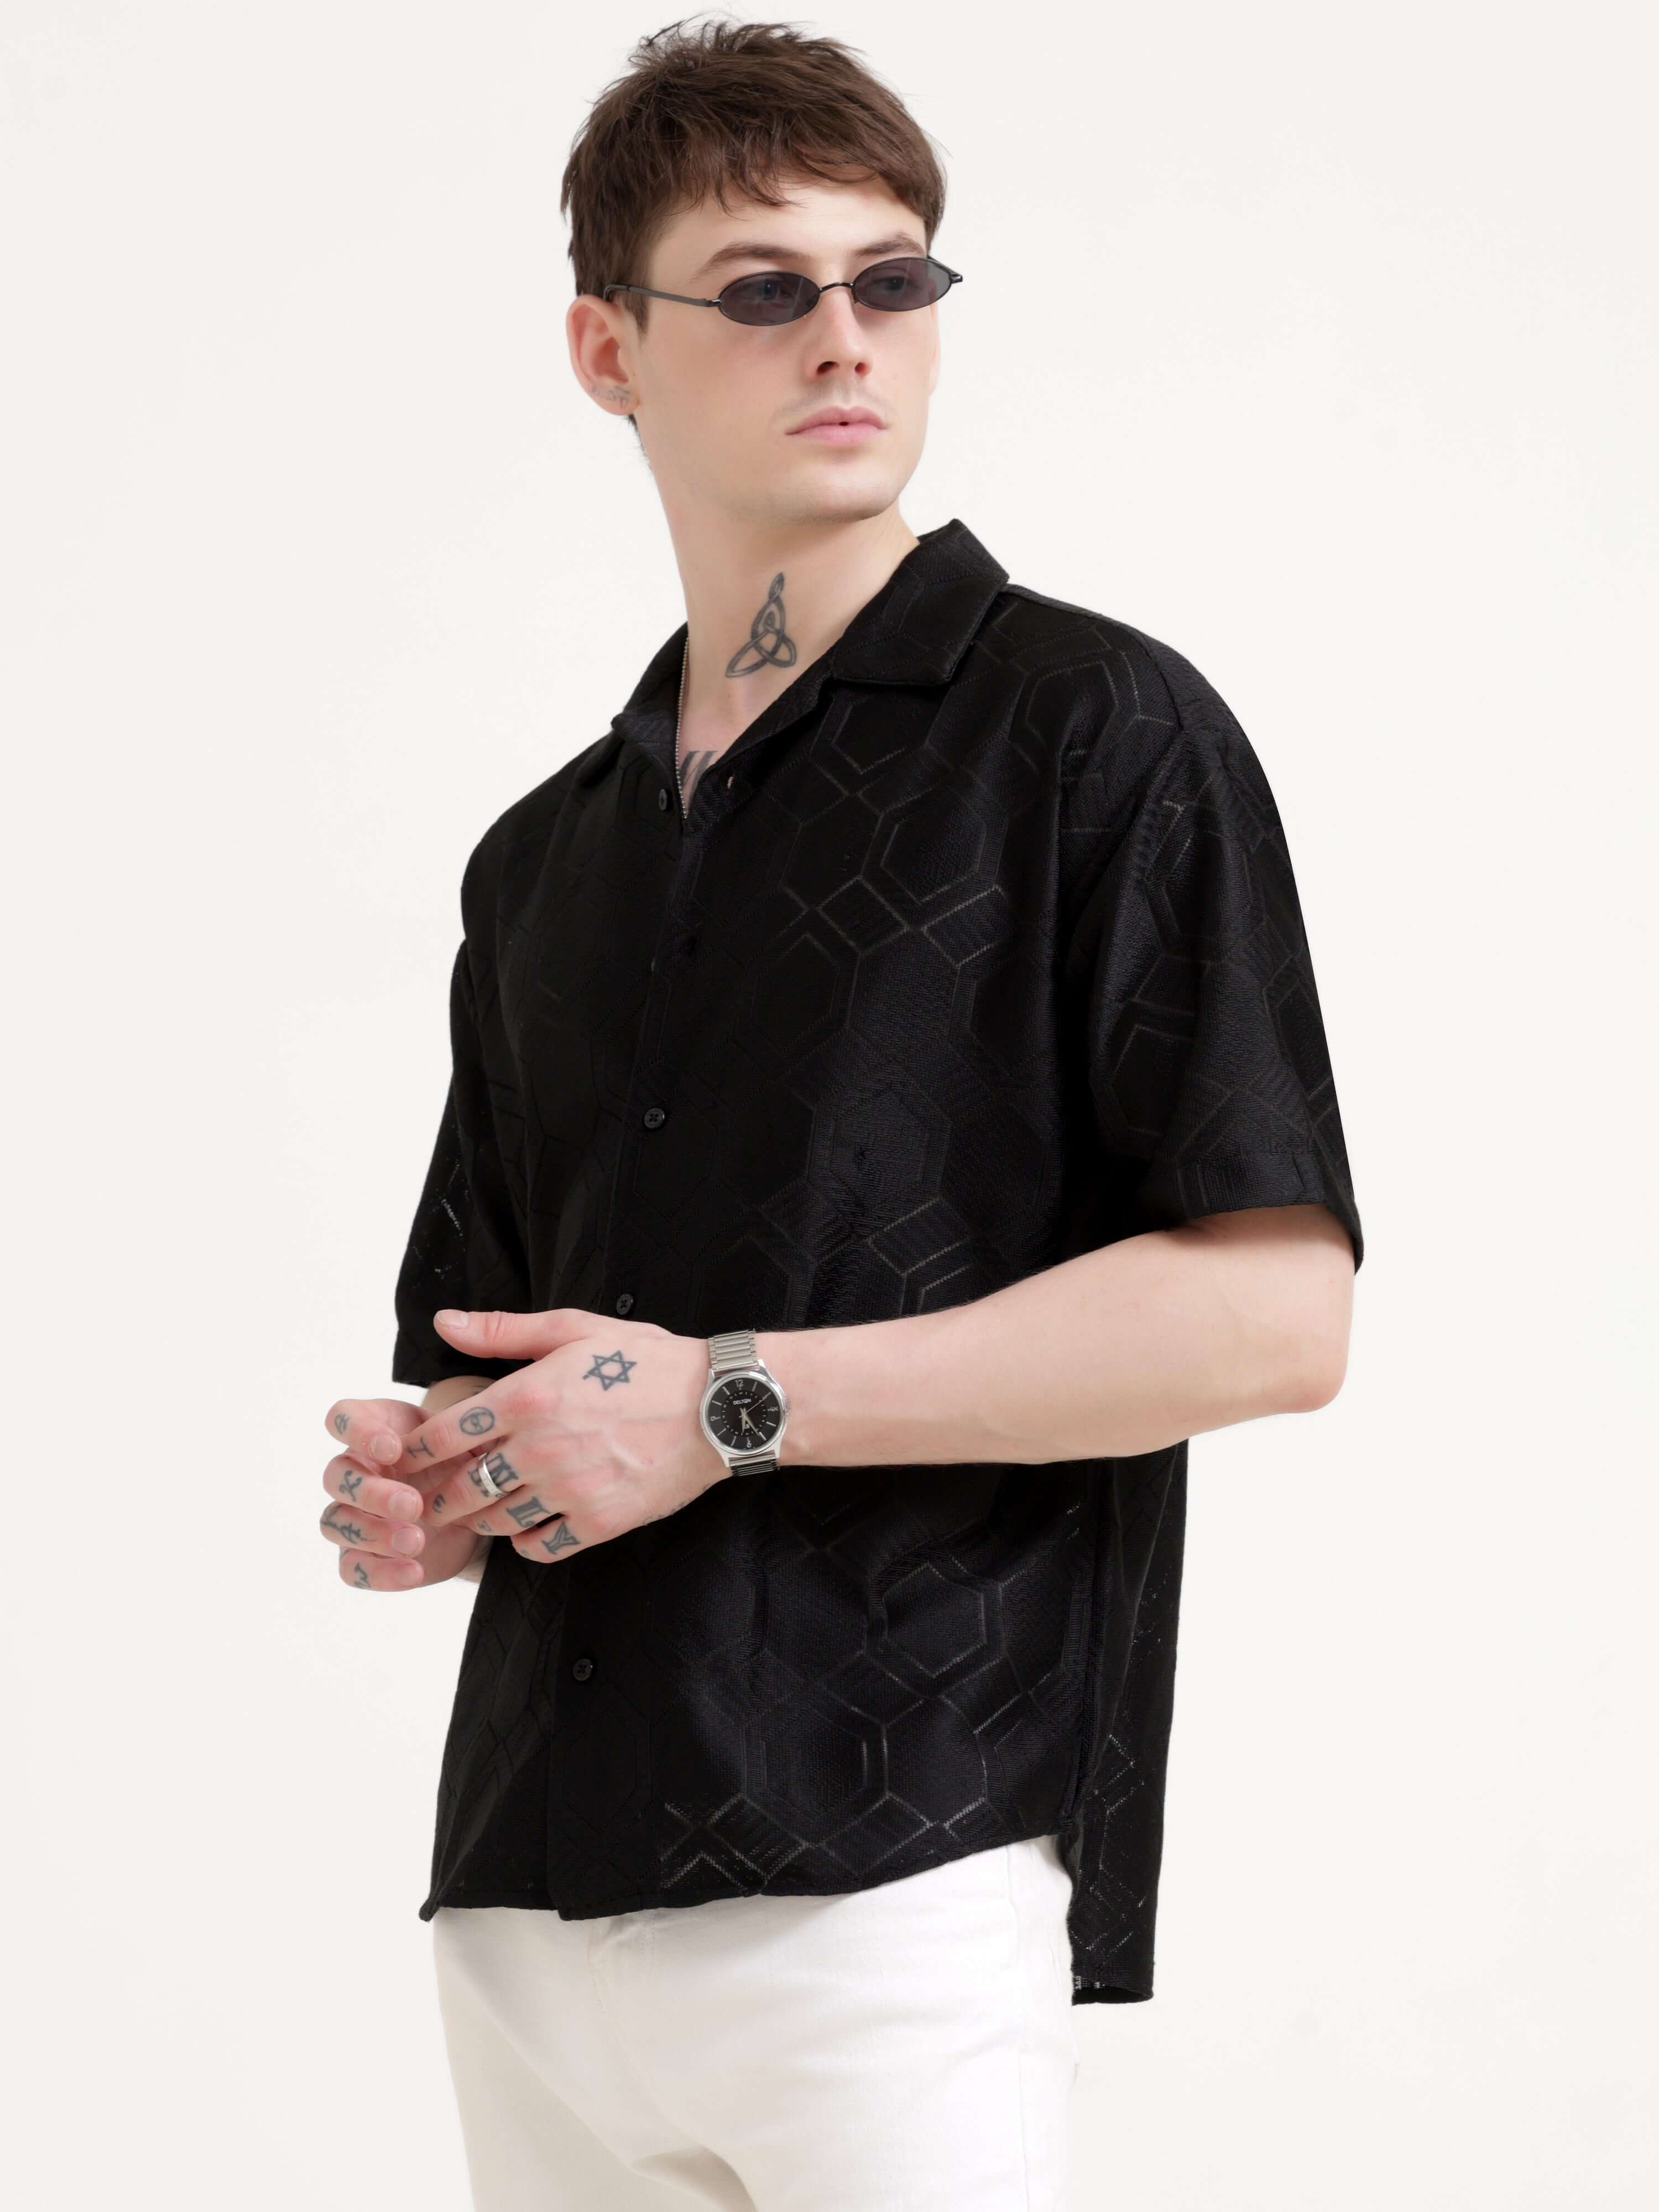 Texturiche black crochet oversized shirt - Men's Casual Wear shop online at Estilocus. Rock your summer vibes with our Texturiche black crochet oversized shirt. Perfect fit, airy fabric & stylish. Grab yours & stay cool!